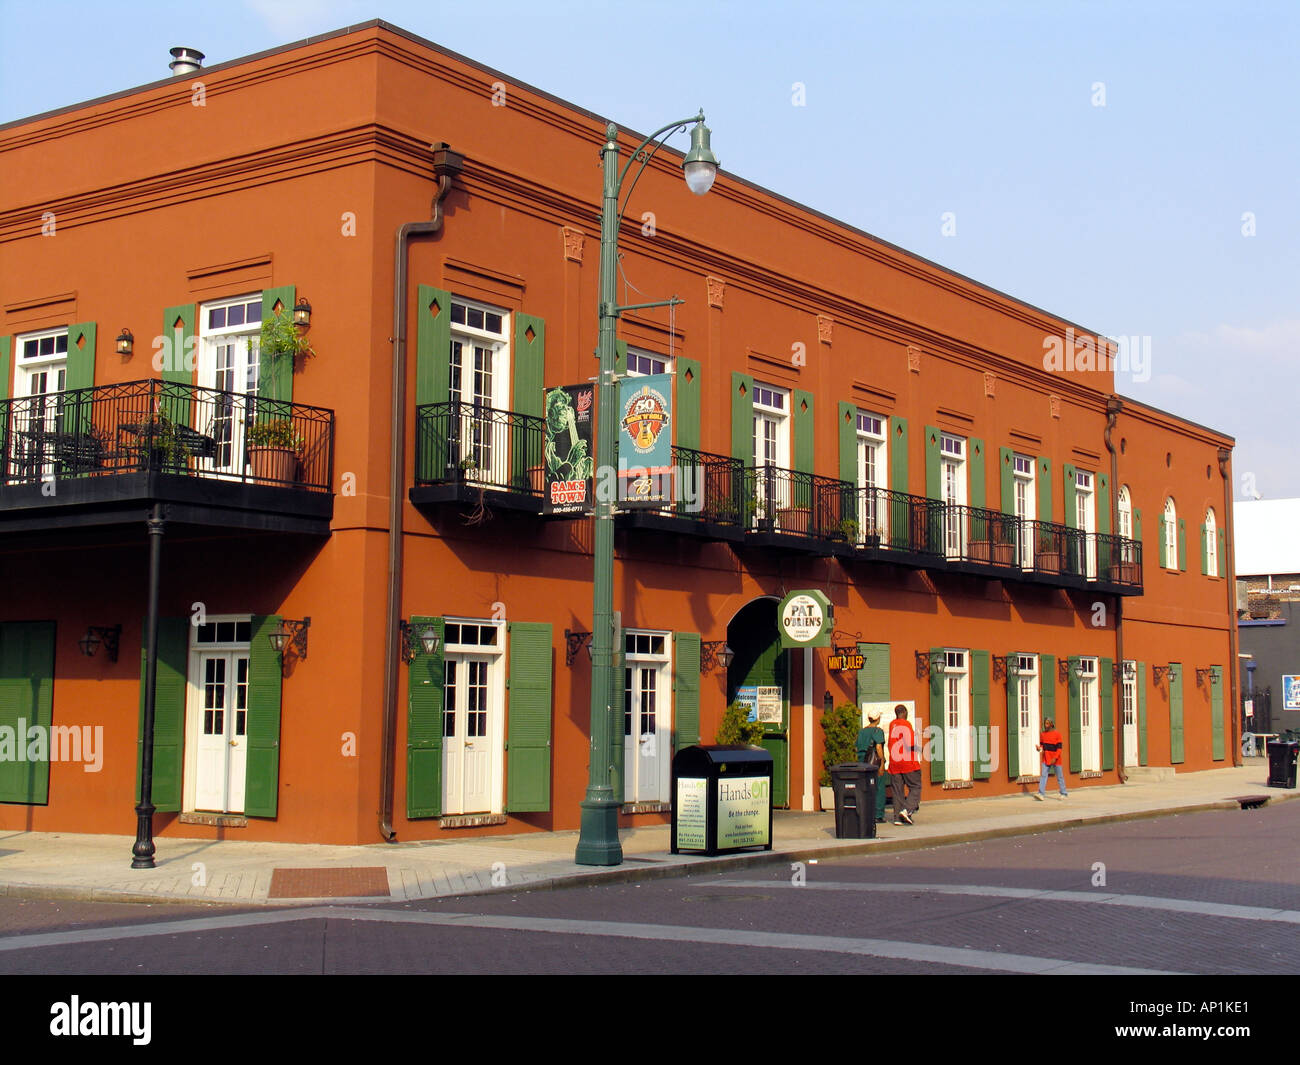 Pat OBriens a New Orleans style chain restaurant and bar Beale Street Memphis USA Stock Photo